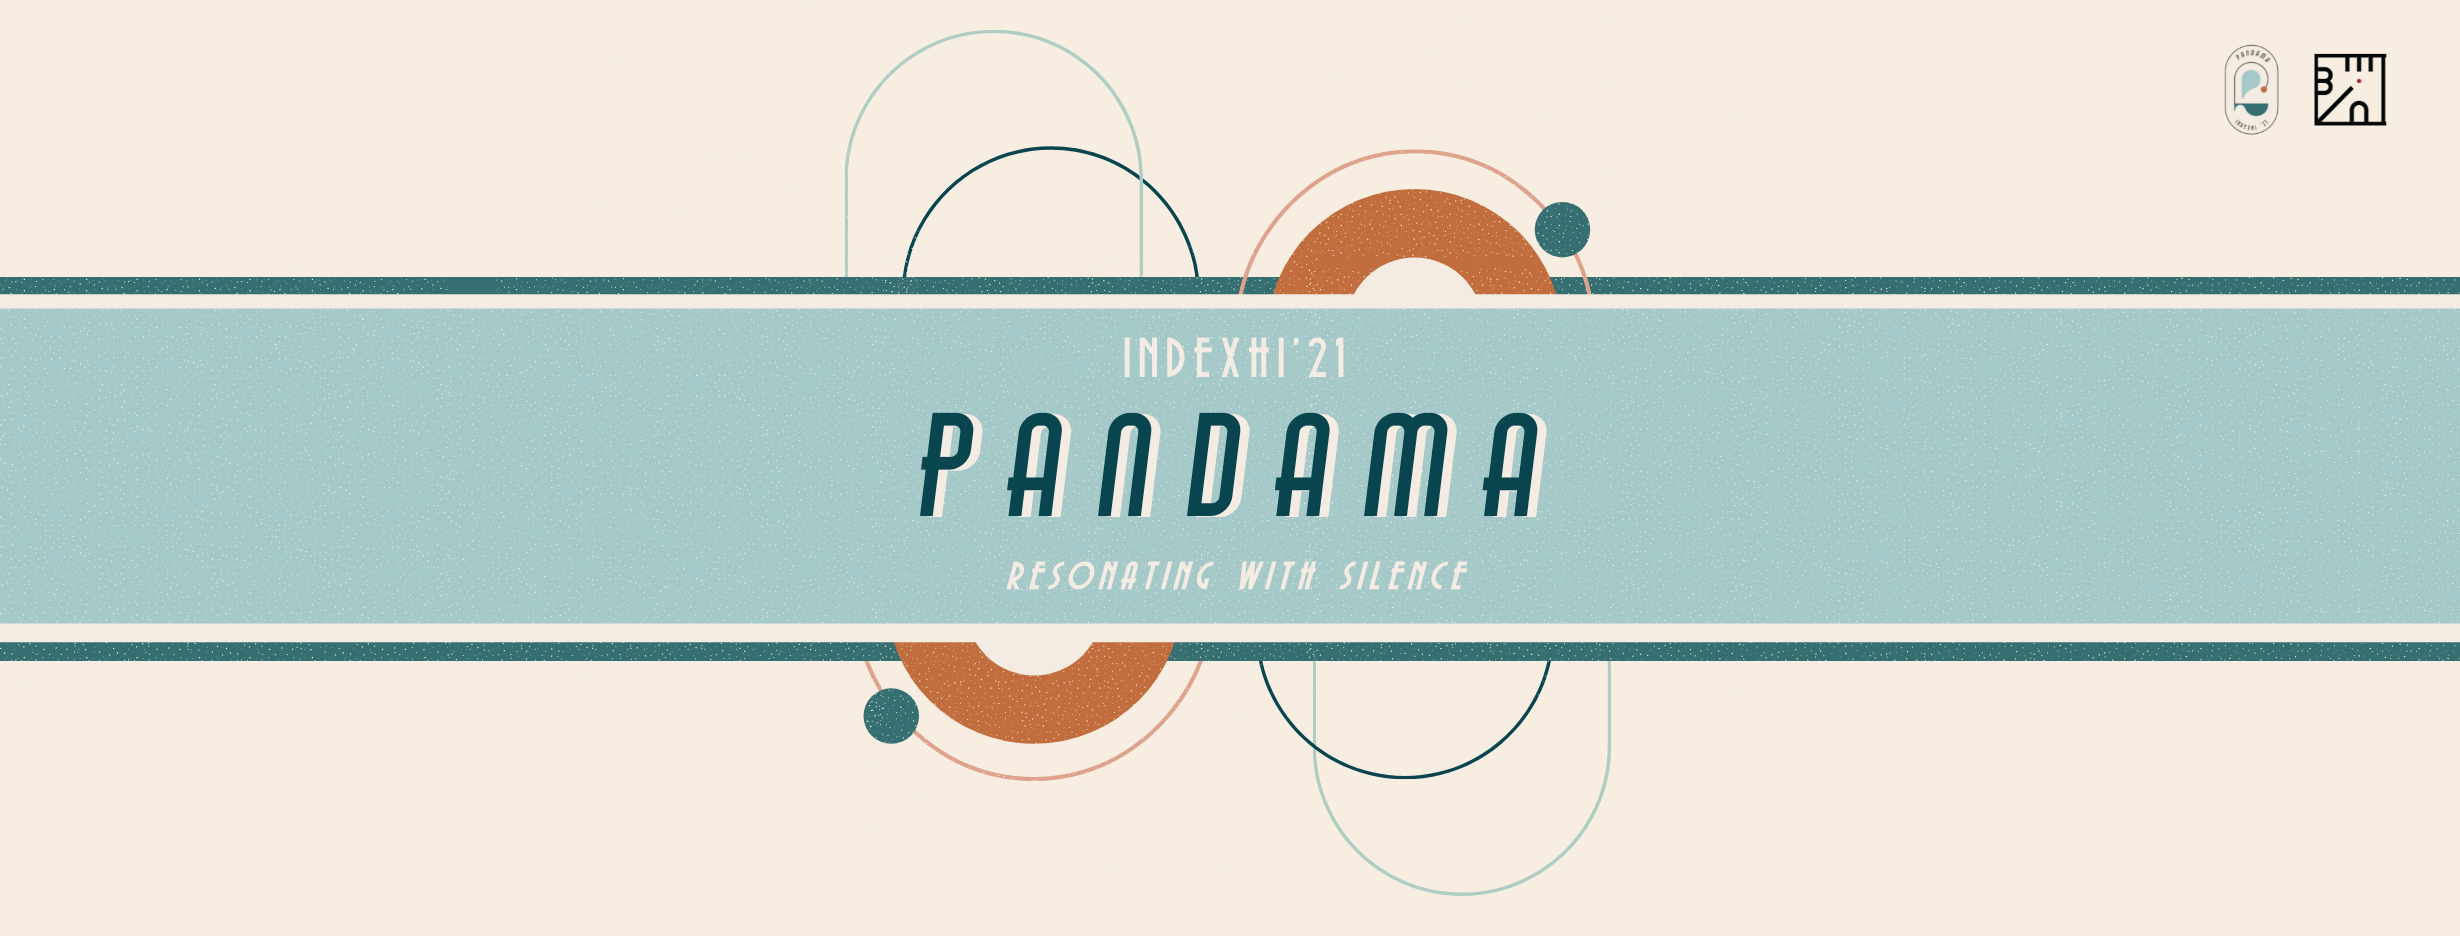 Cover Photo From The Indx '21 Pandama Official Facebook Page